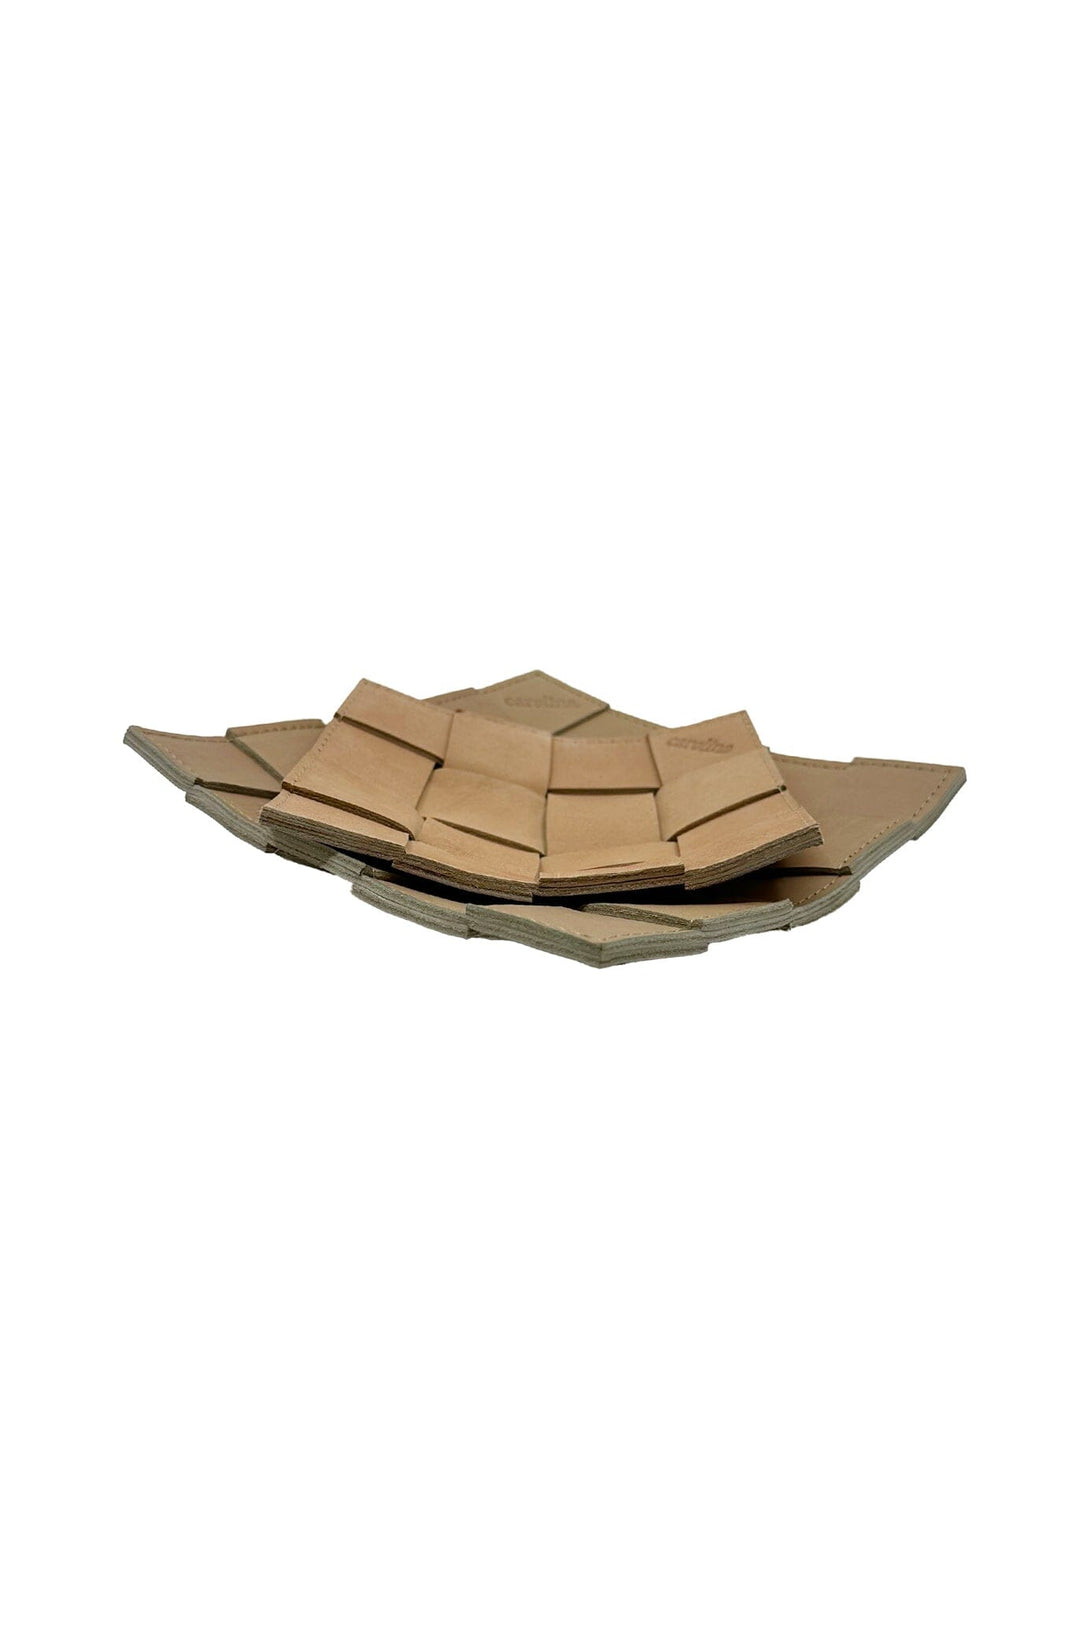 Plaited Leather Trays Pack of 2 Leather